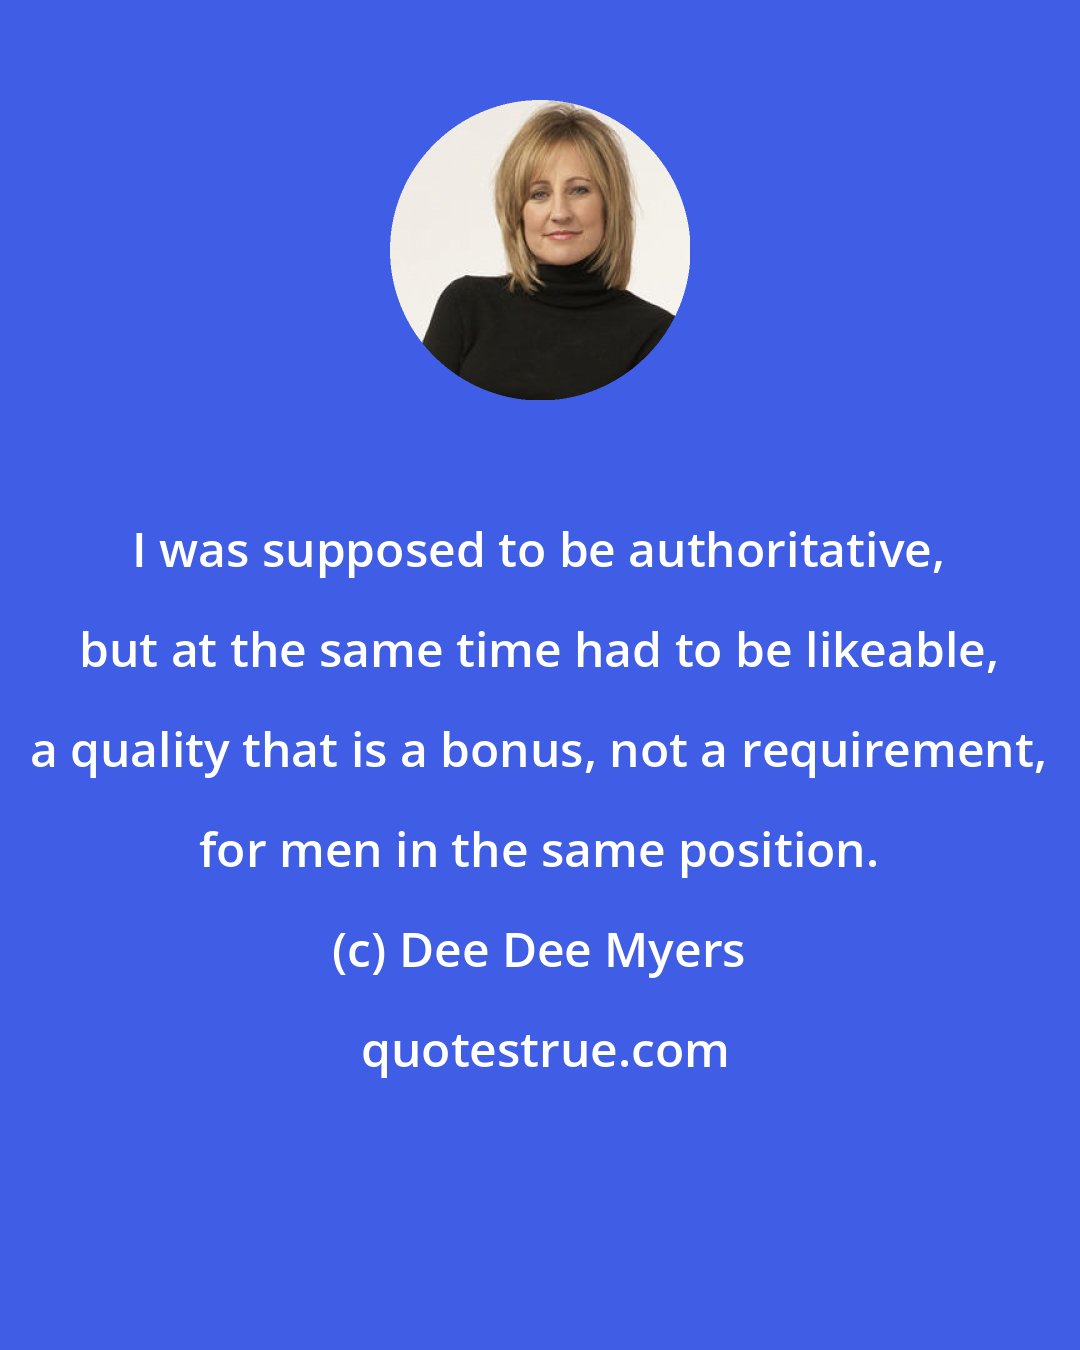 Dee Dee Myers: I was supposed to be authoritative, but at the same time had to be likeable, a quality that is a bonus, not a requirement, for men in the same position.